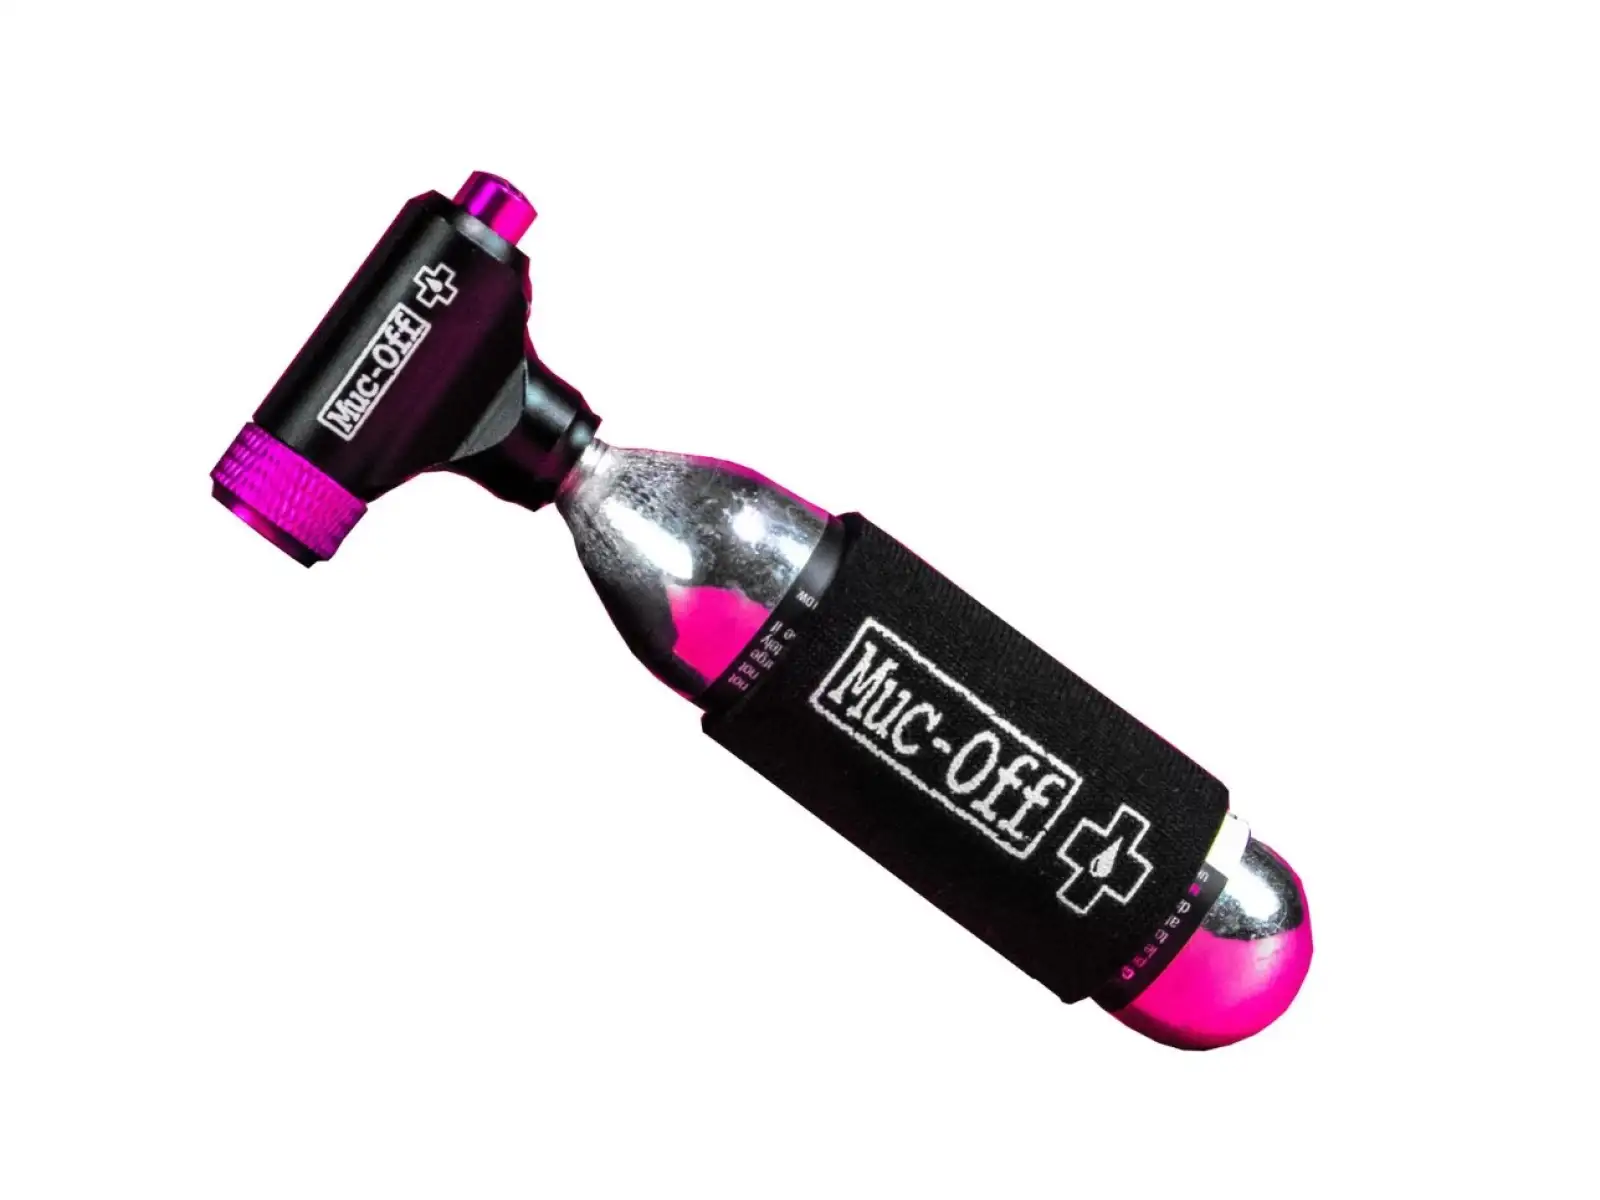 Muc-Off Inflater Kit Road CO2 pumpa